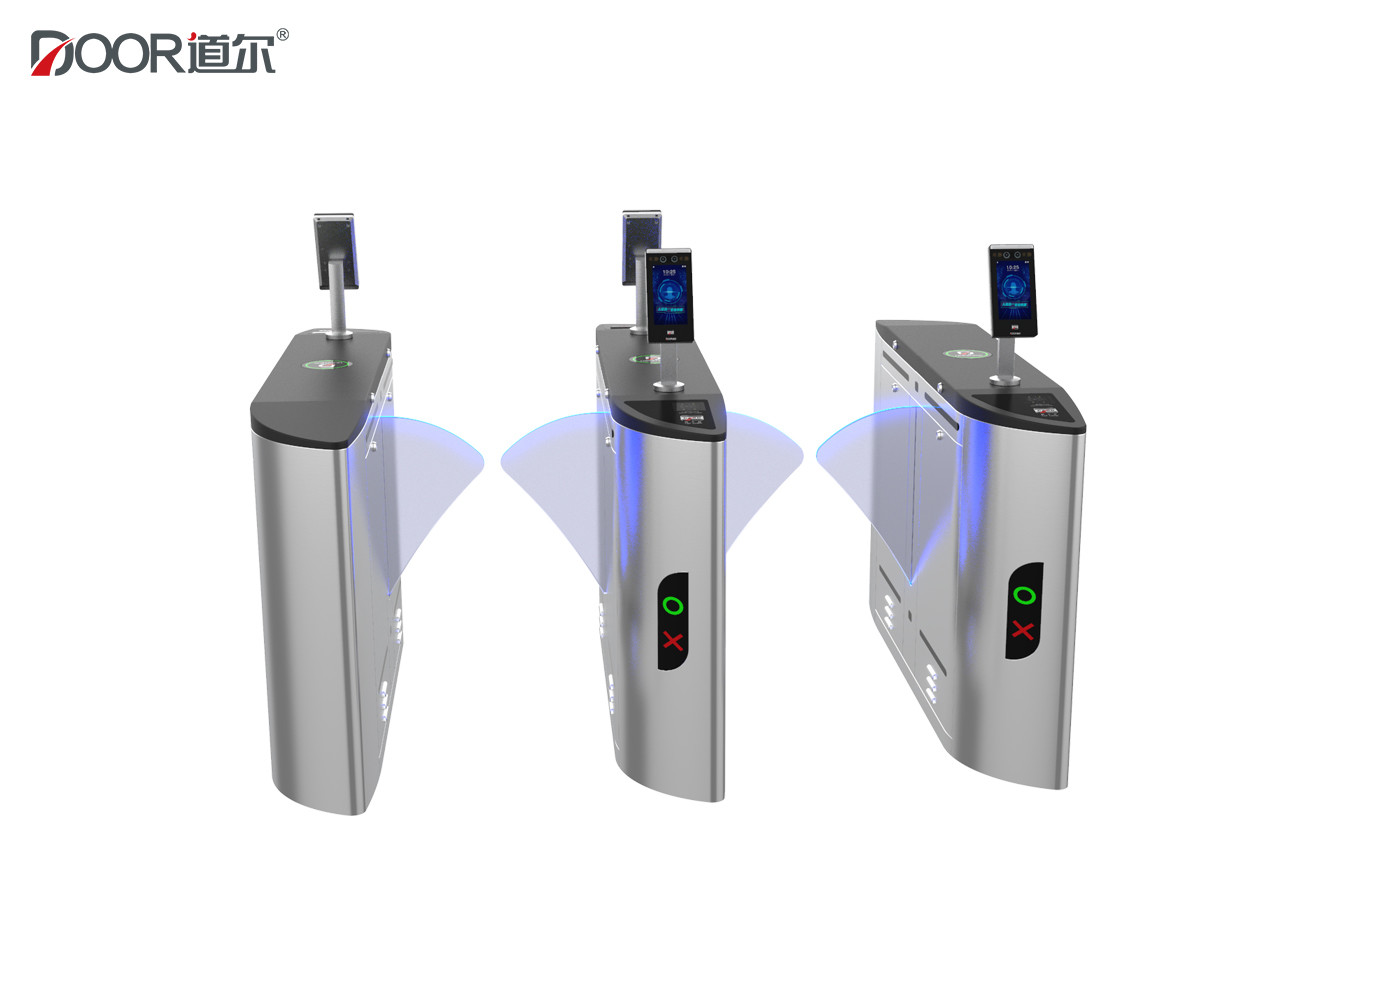 Waist Height Retractable Electronic Turnstile Gates Top Cover 2.0mm 550mm